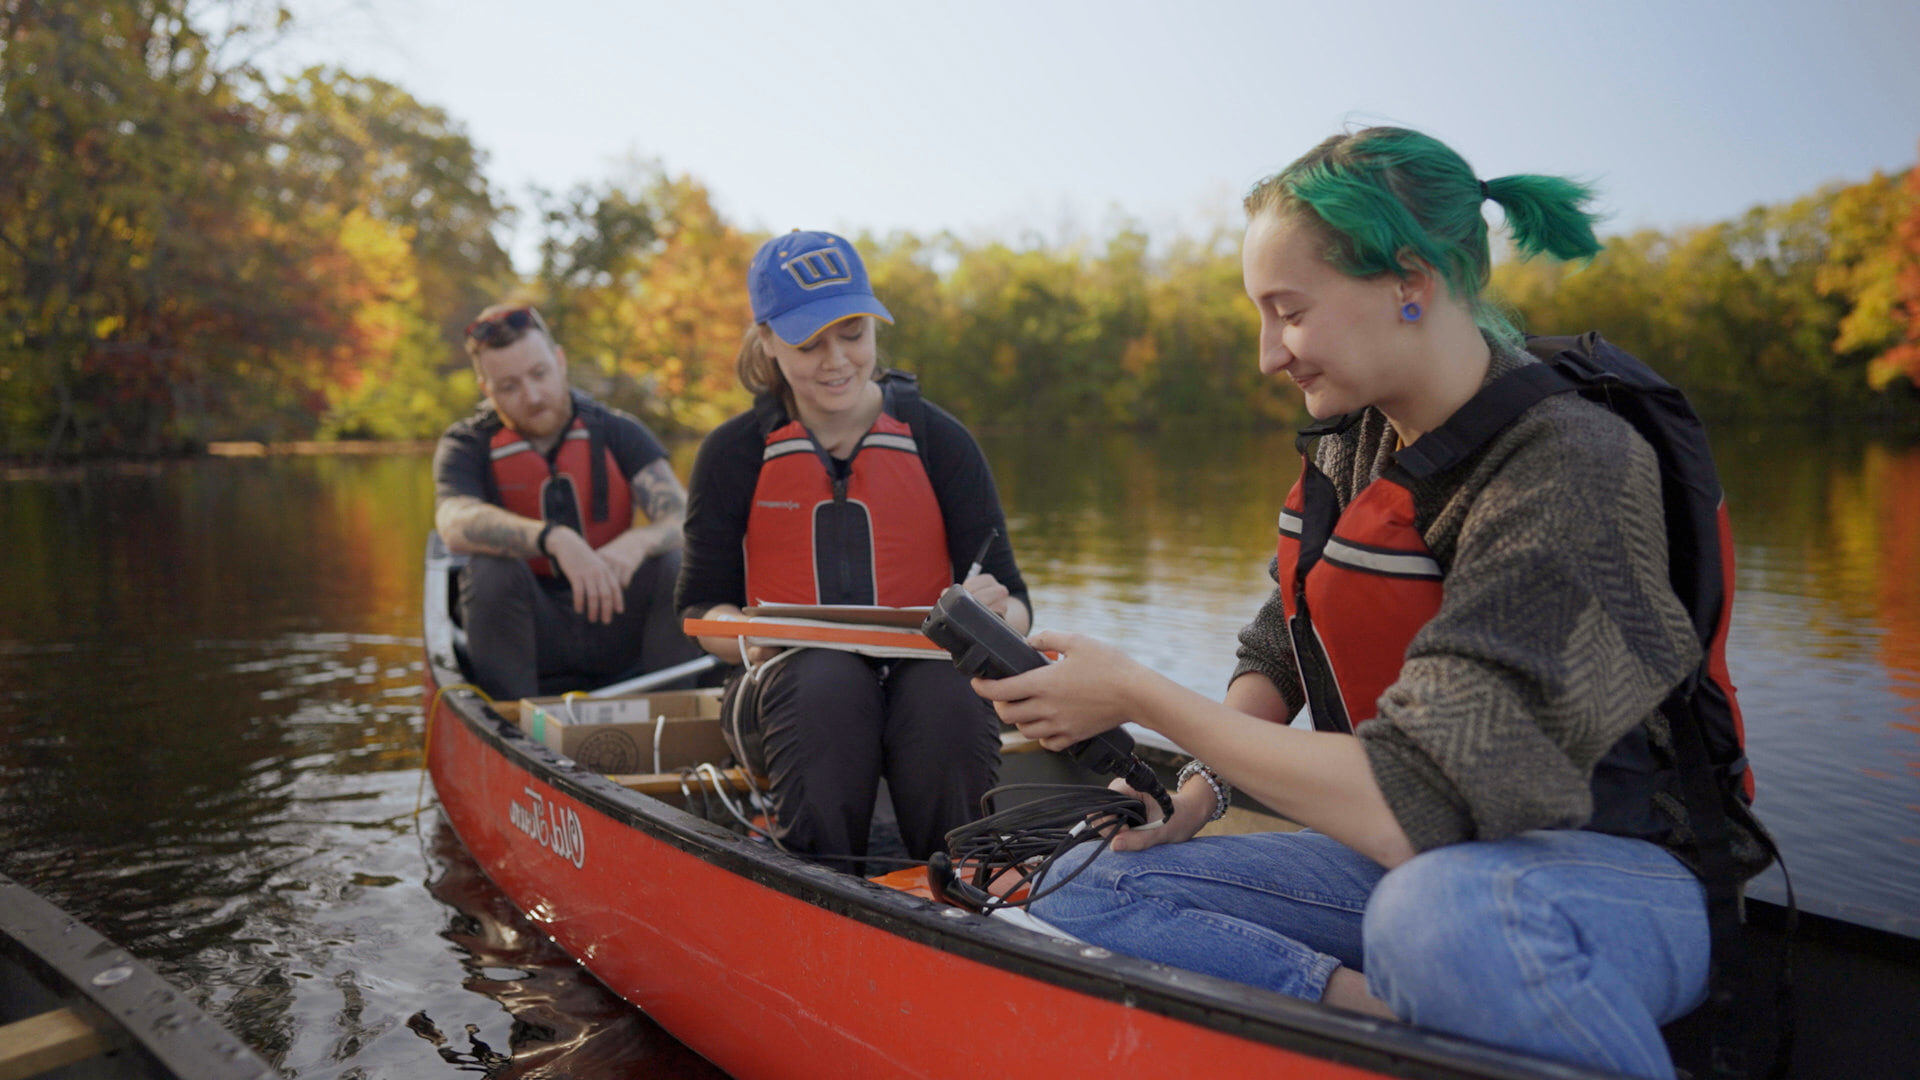 Worcester State students researching in a boat on a lake